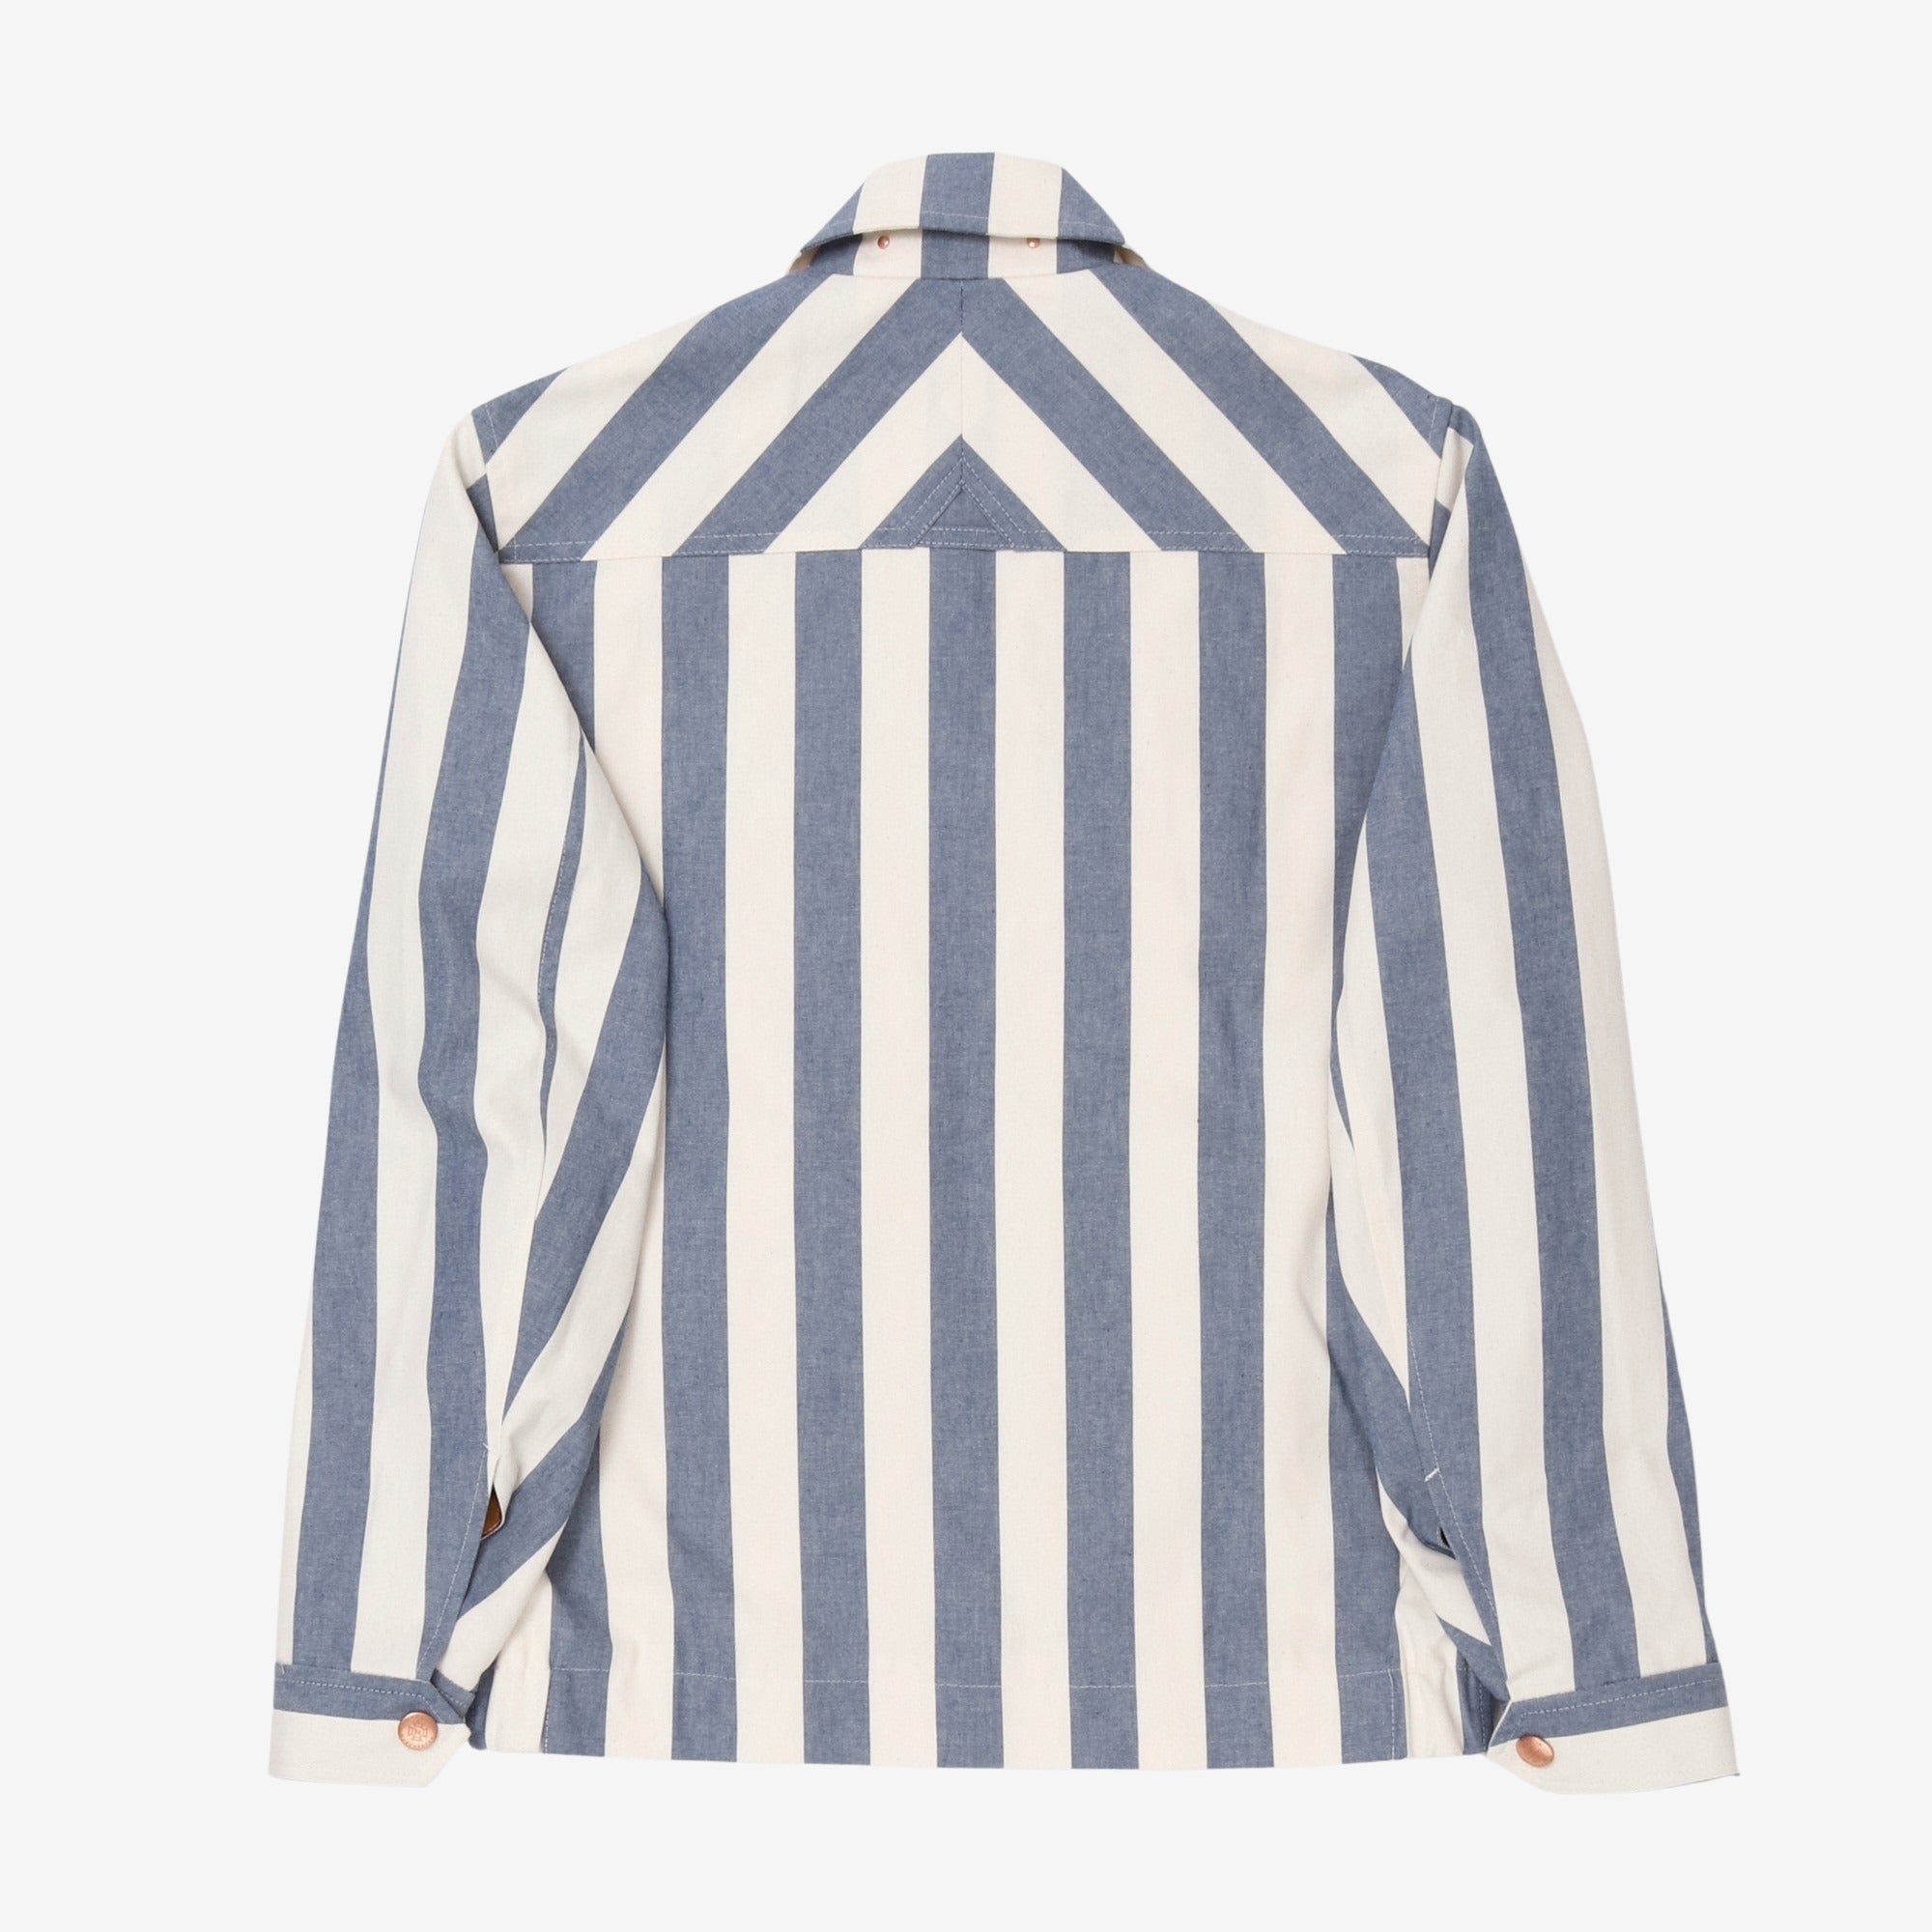 The Striped Summer Bomber